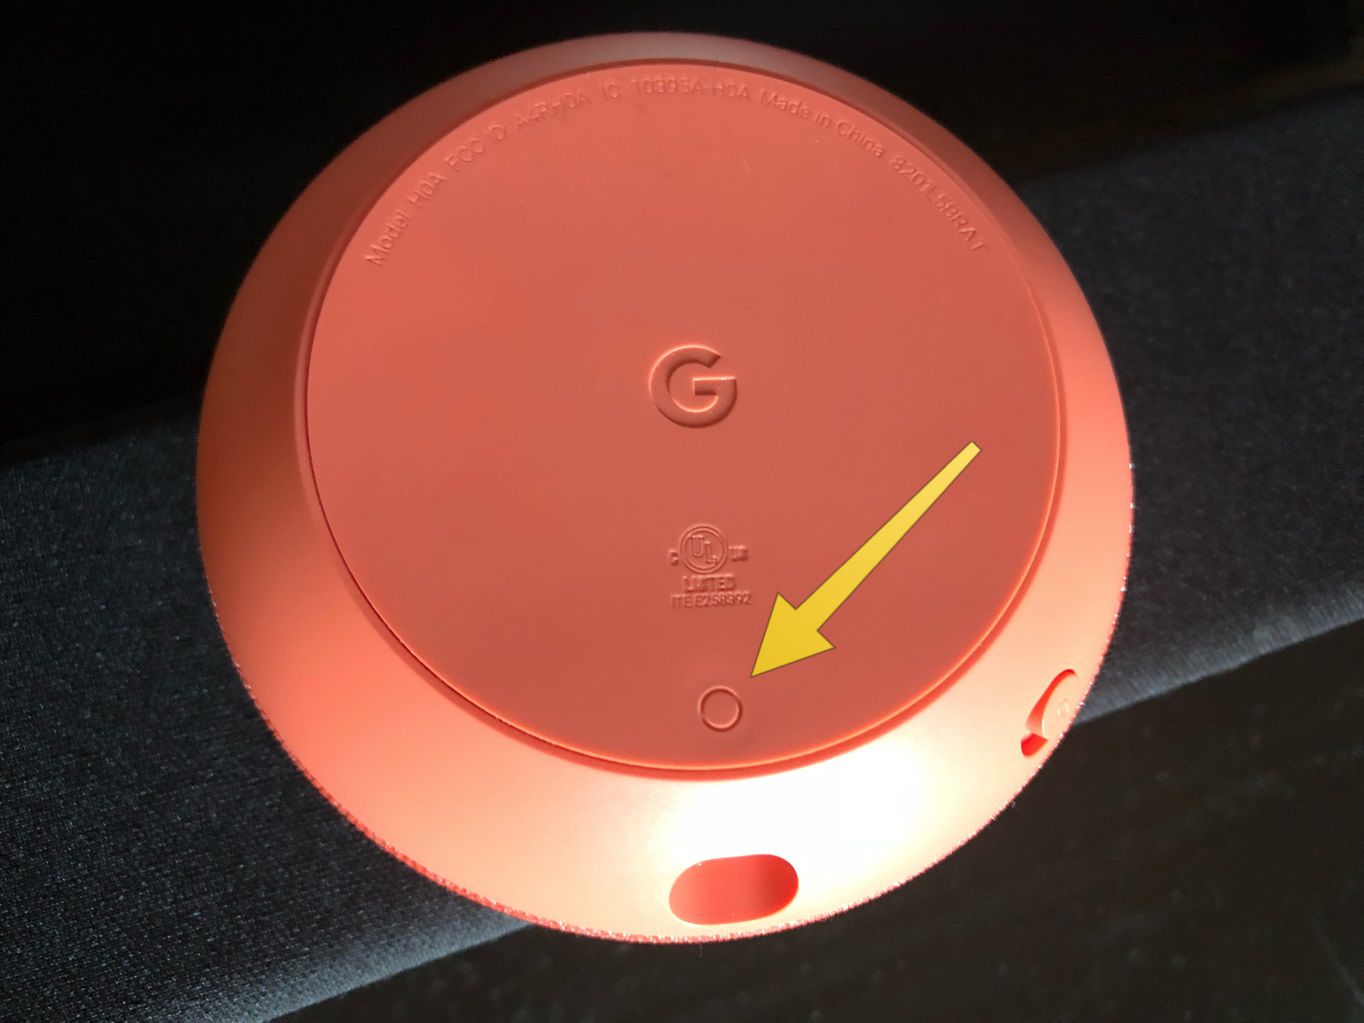 How To Reset My Google Home Wi-Fi